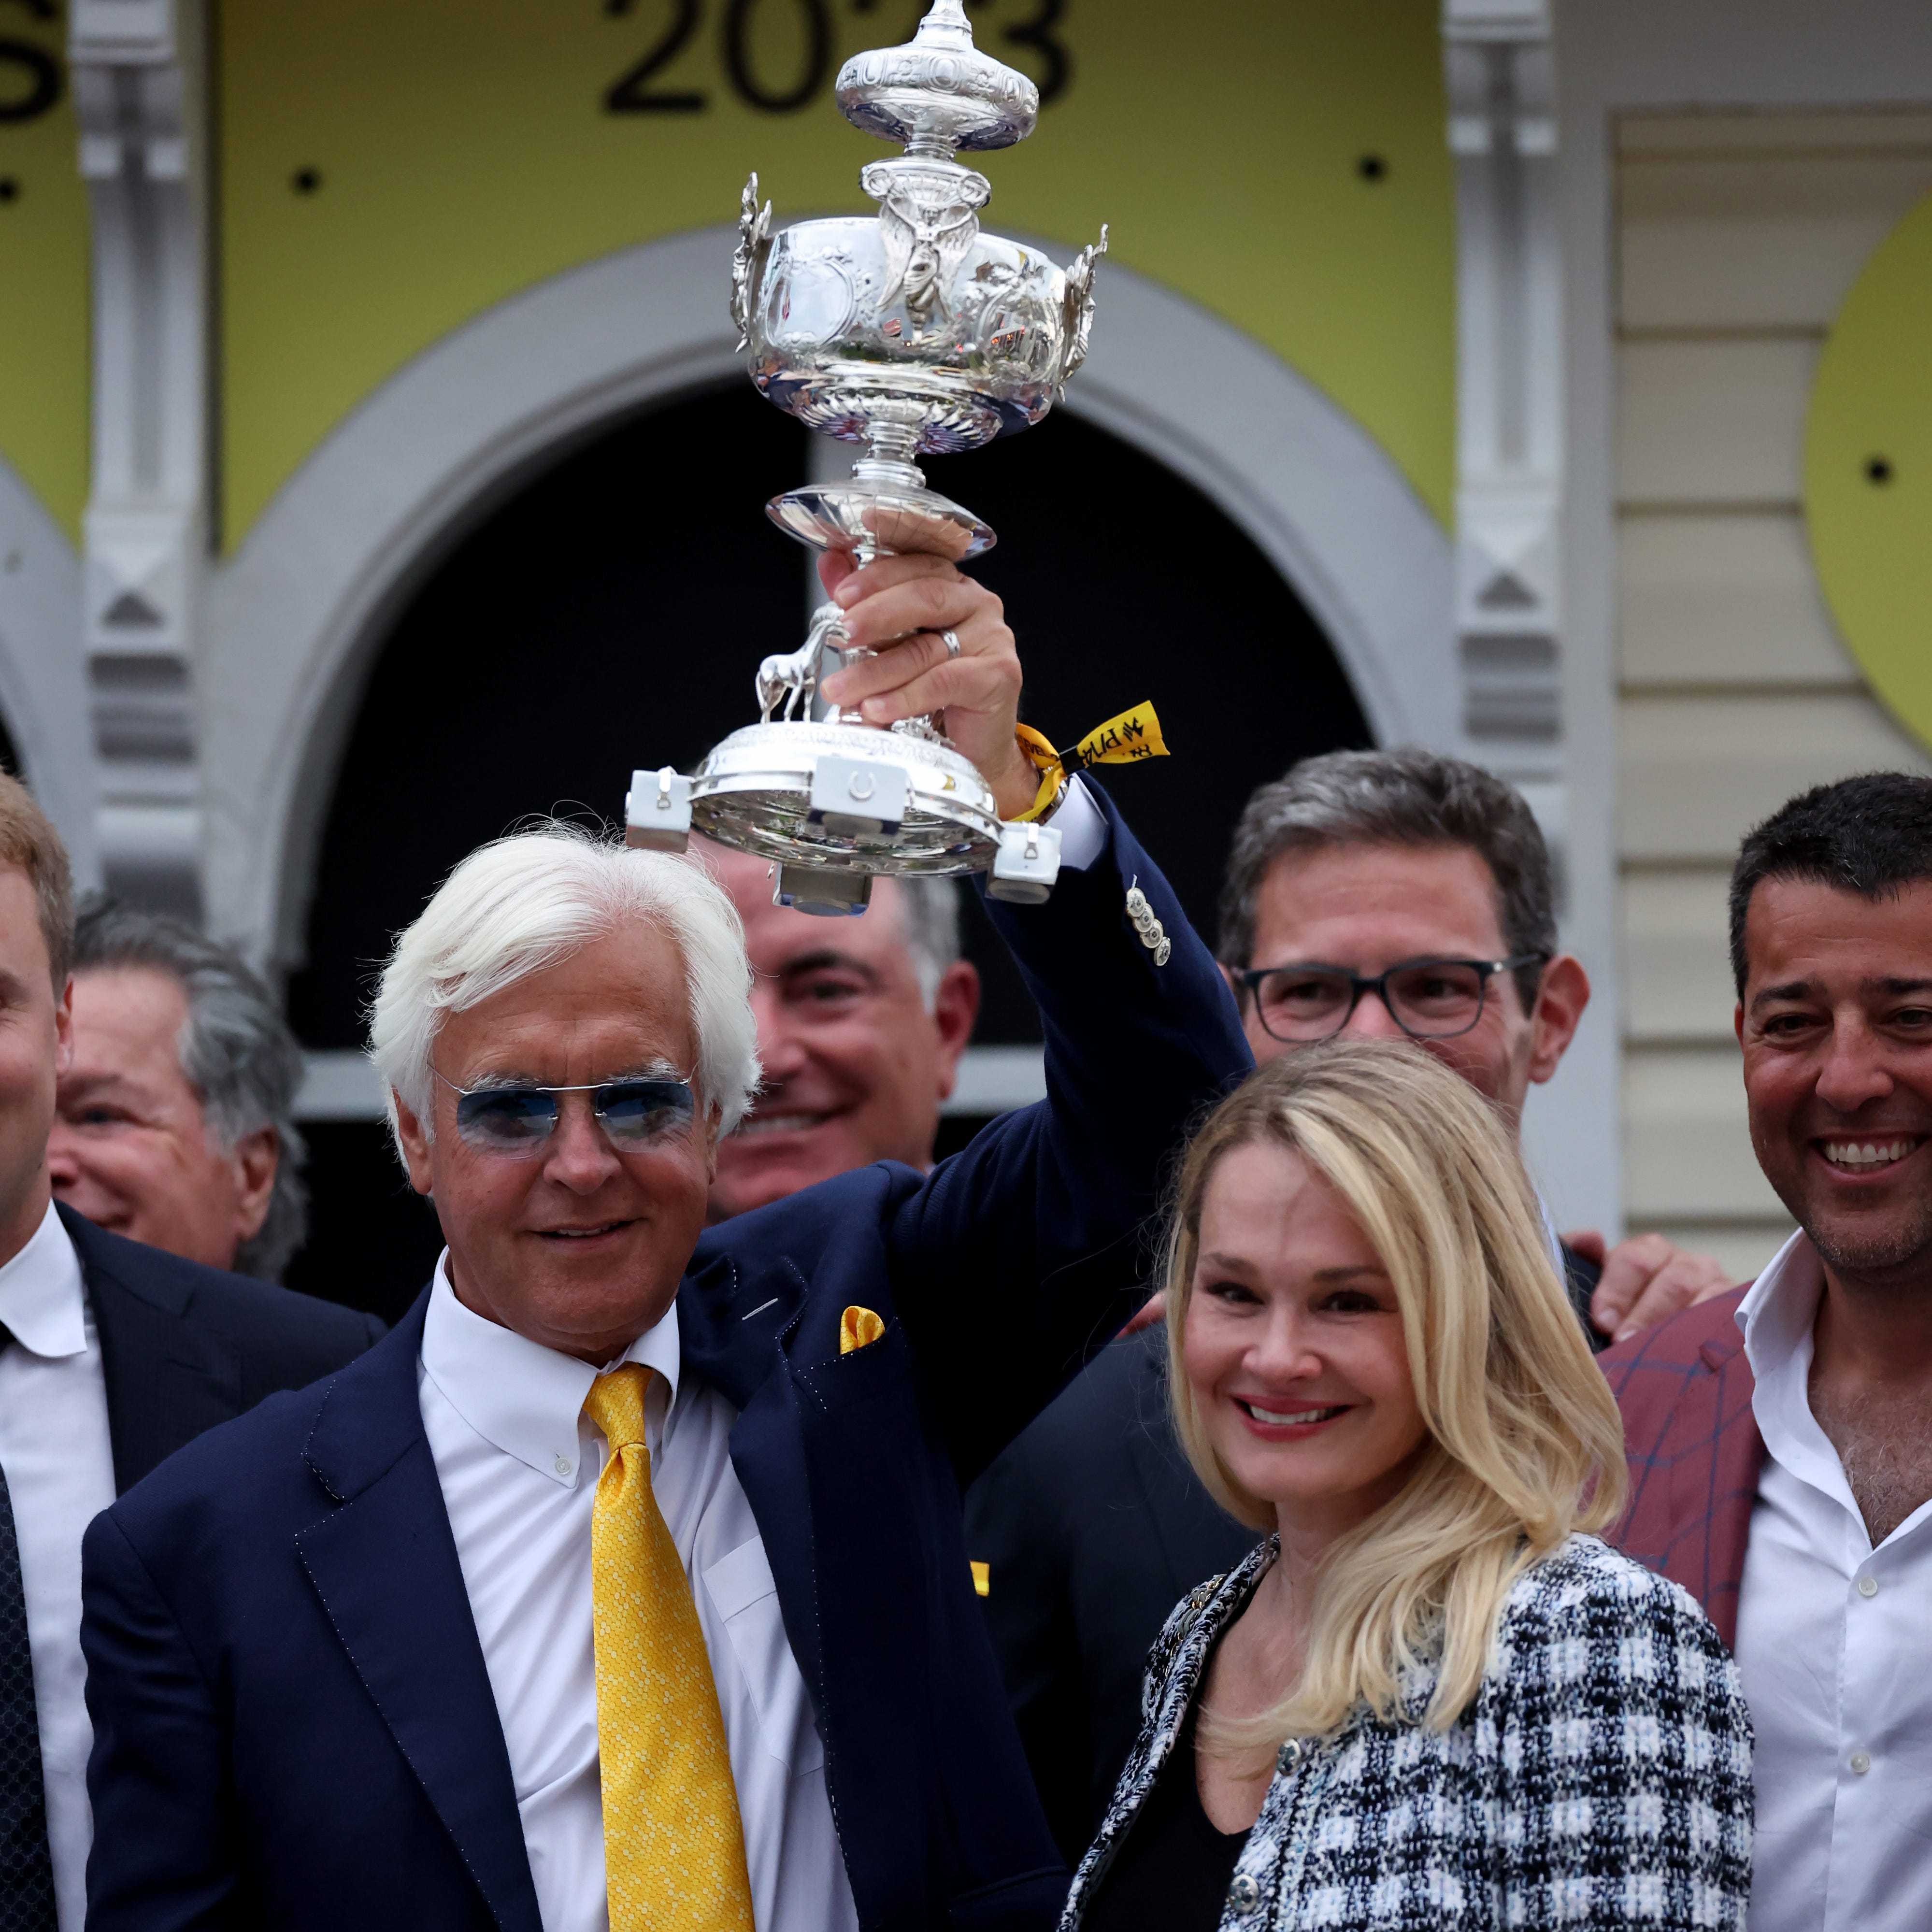 BALTIMORE, MARYLAND - MAY 20: Trainer Bob Baffert celebrates in the winners circle after his horse National Treasure won the 148th Running of the Preakness Stakes at Pimlico Race Course on May 20, 2023 in Baltimore, Maryland. (Photo by Rob Carr/Getty Images) ORG XMIT: 775929748 ORIG FILE ID: 1491818774